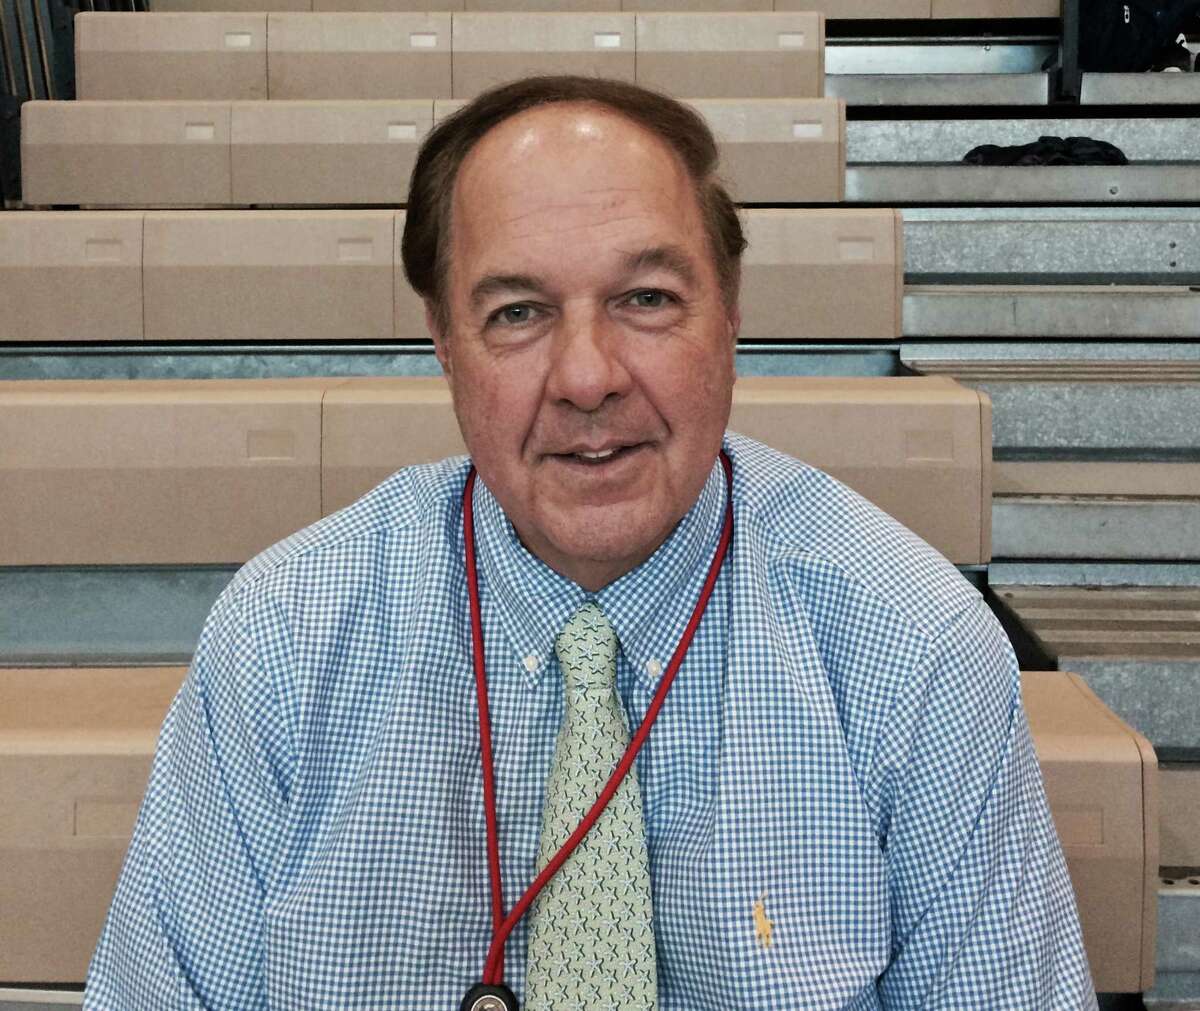 Eastern Middle School Assistant Principal Jim Shukie is retiring on Monday, Feb. 1, 2016.